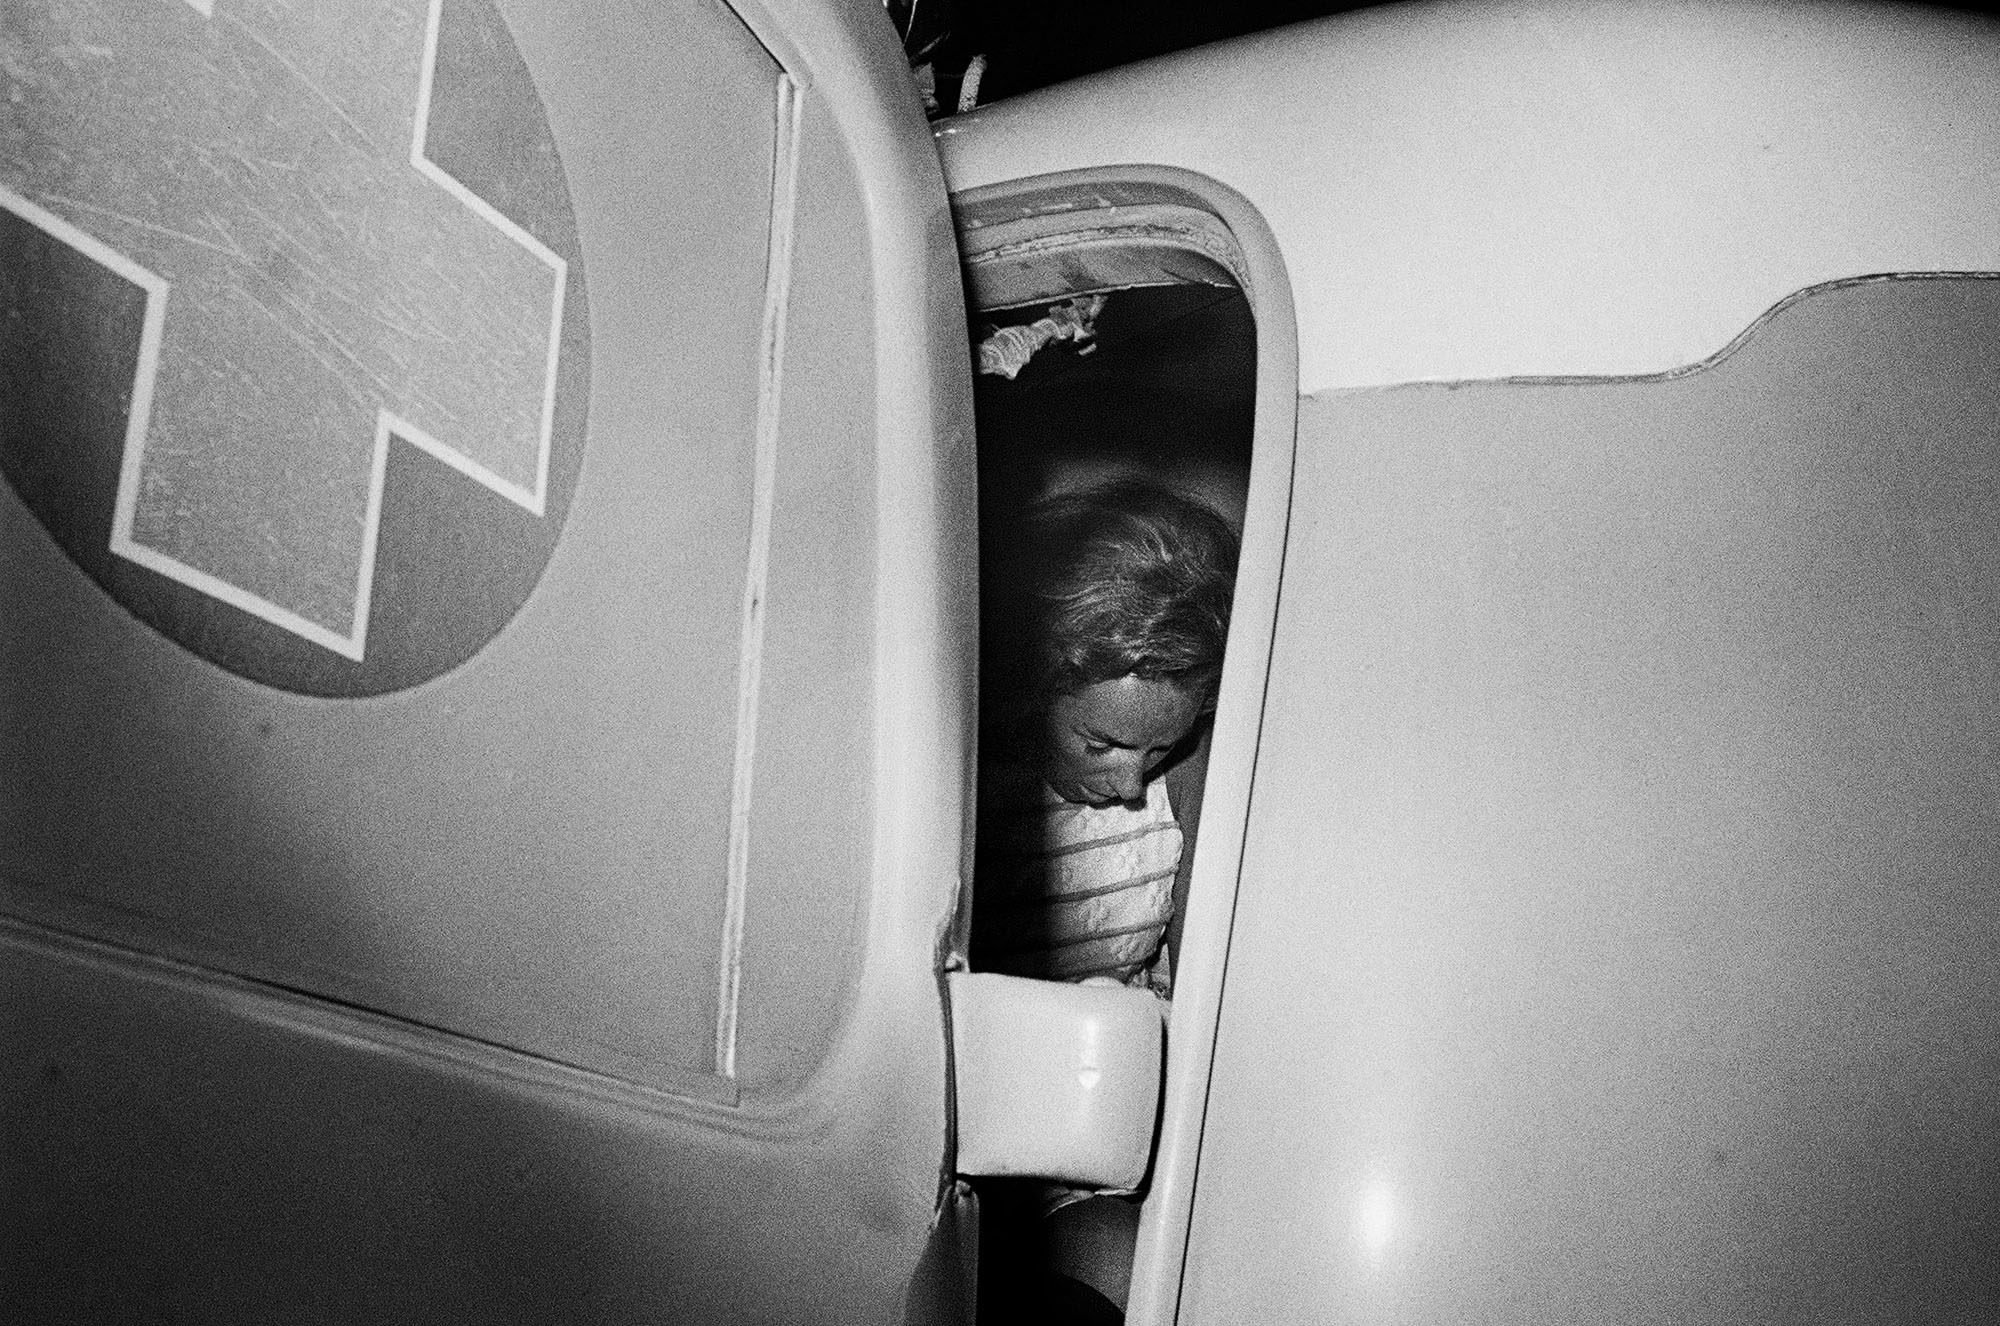 Ethel Kennedy in the back of ambulance after her husband was shot